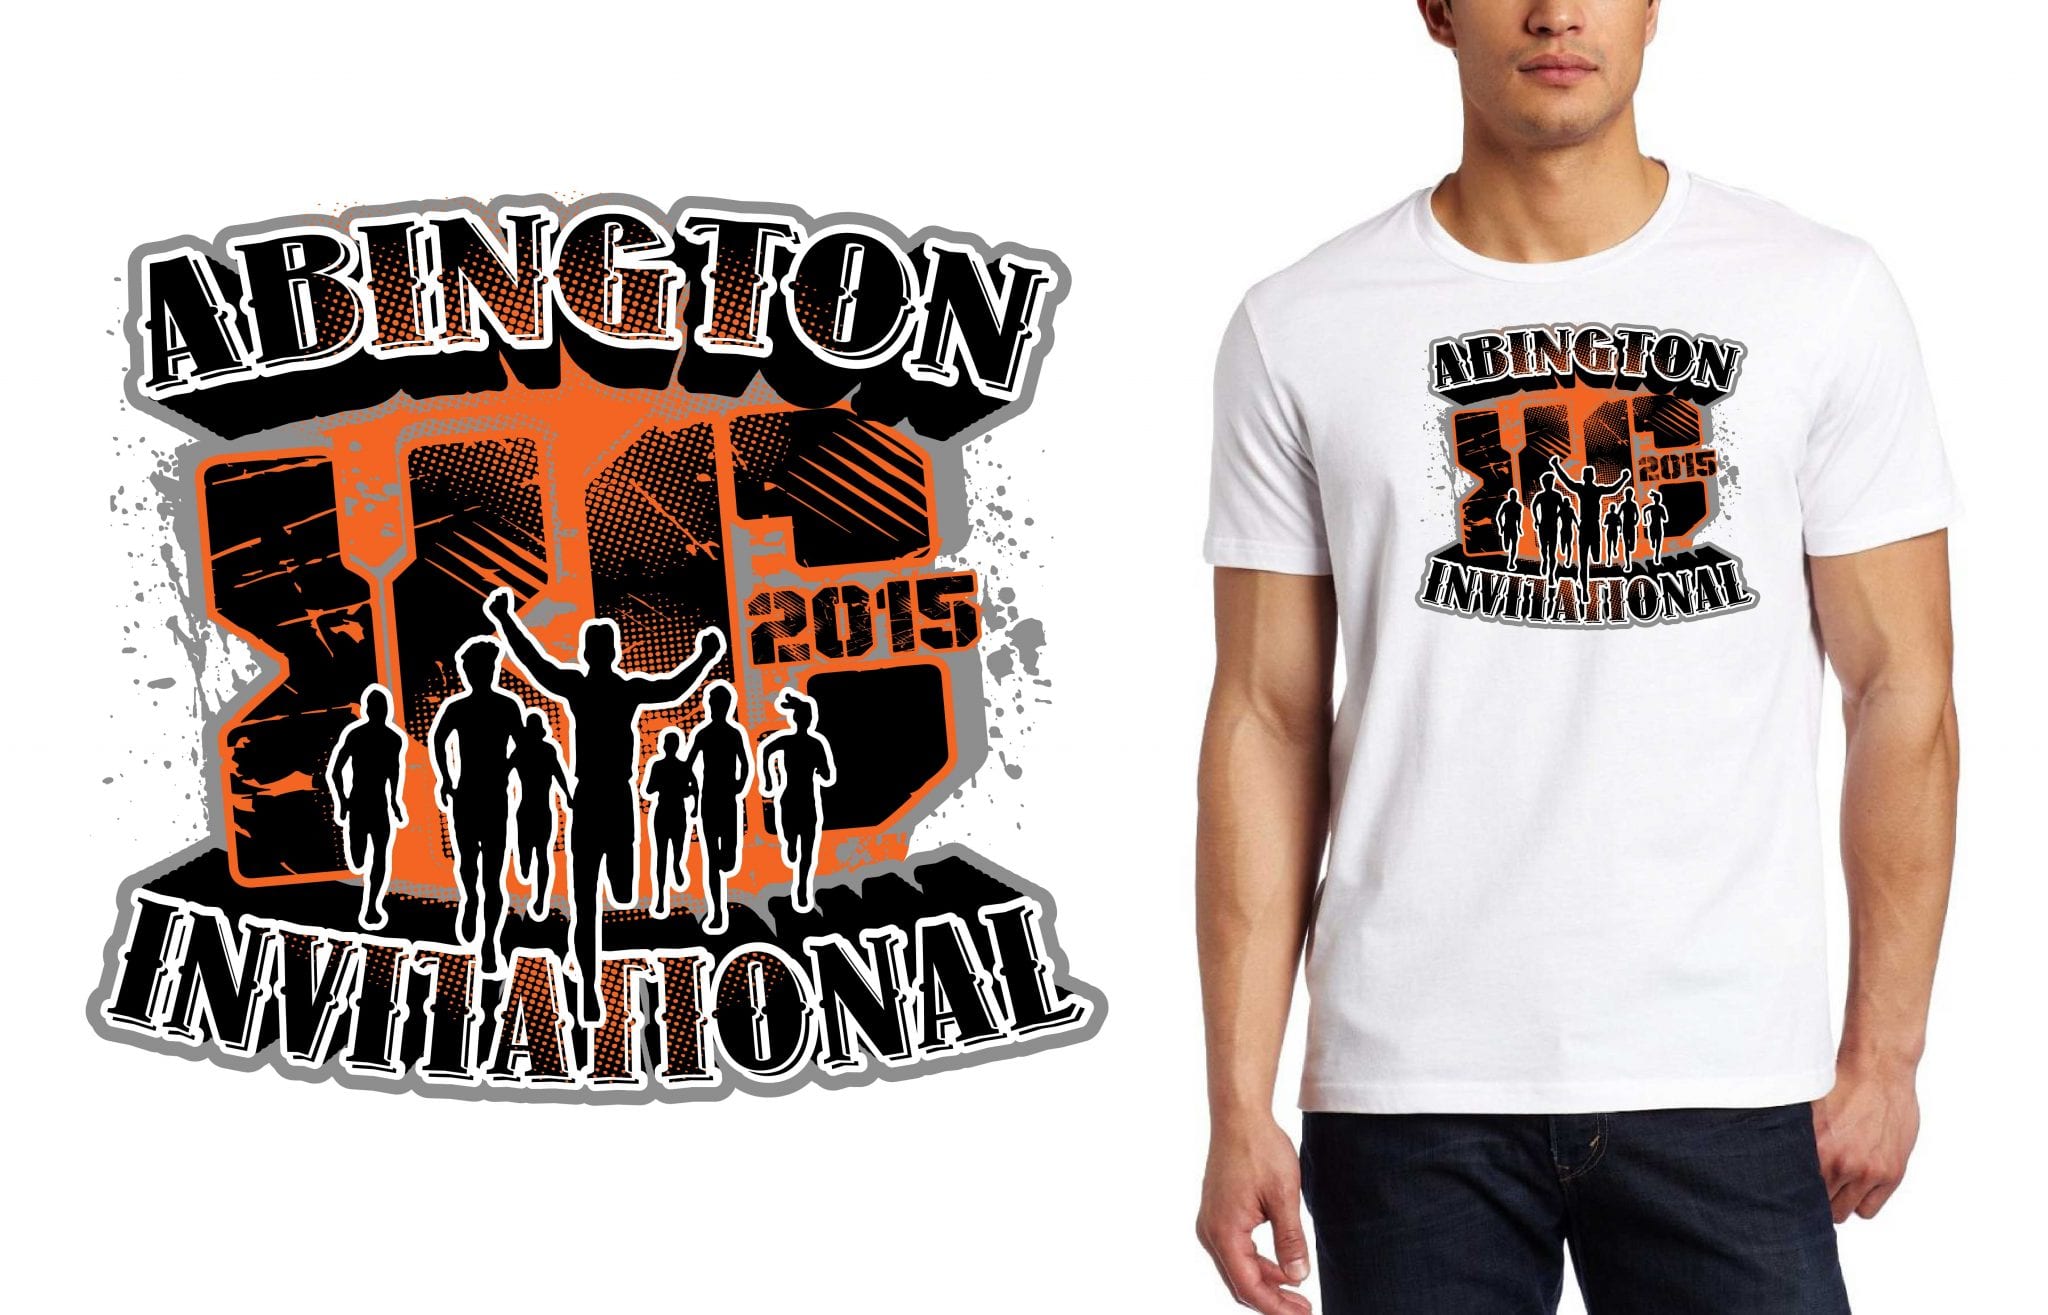 2015 Abington Jack Armstrong Track And Field Invitational Cross Country Tshirt Design Logo Paintings Art Lessons Brushes Art Supply,Paper Design For Scrapbook